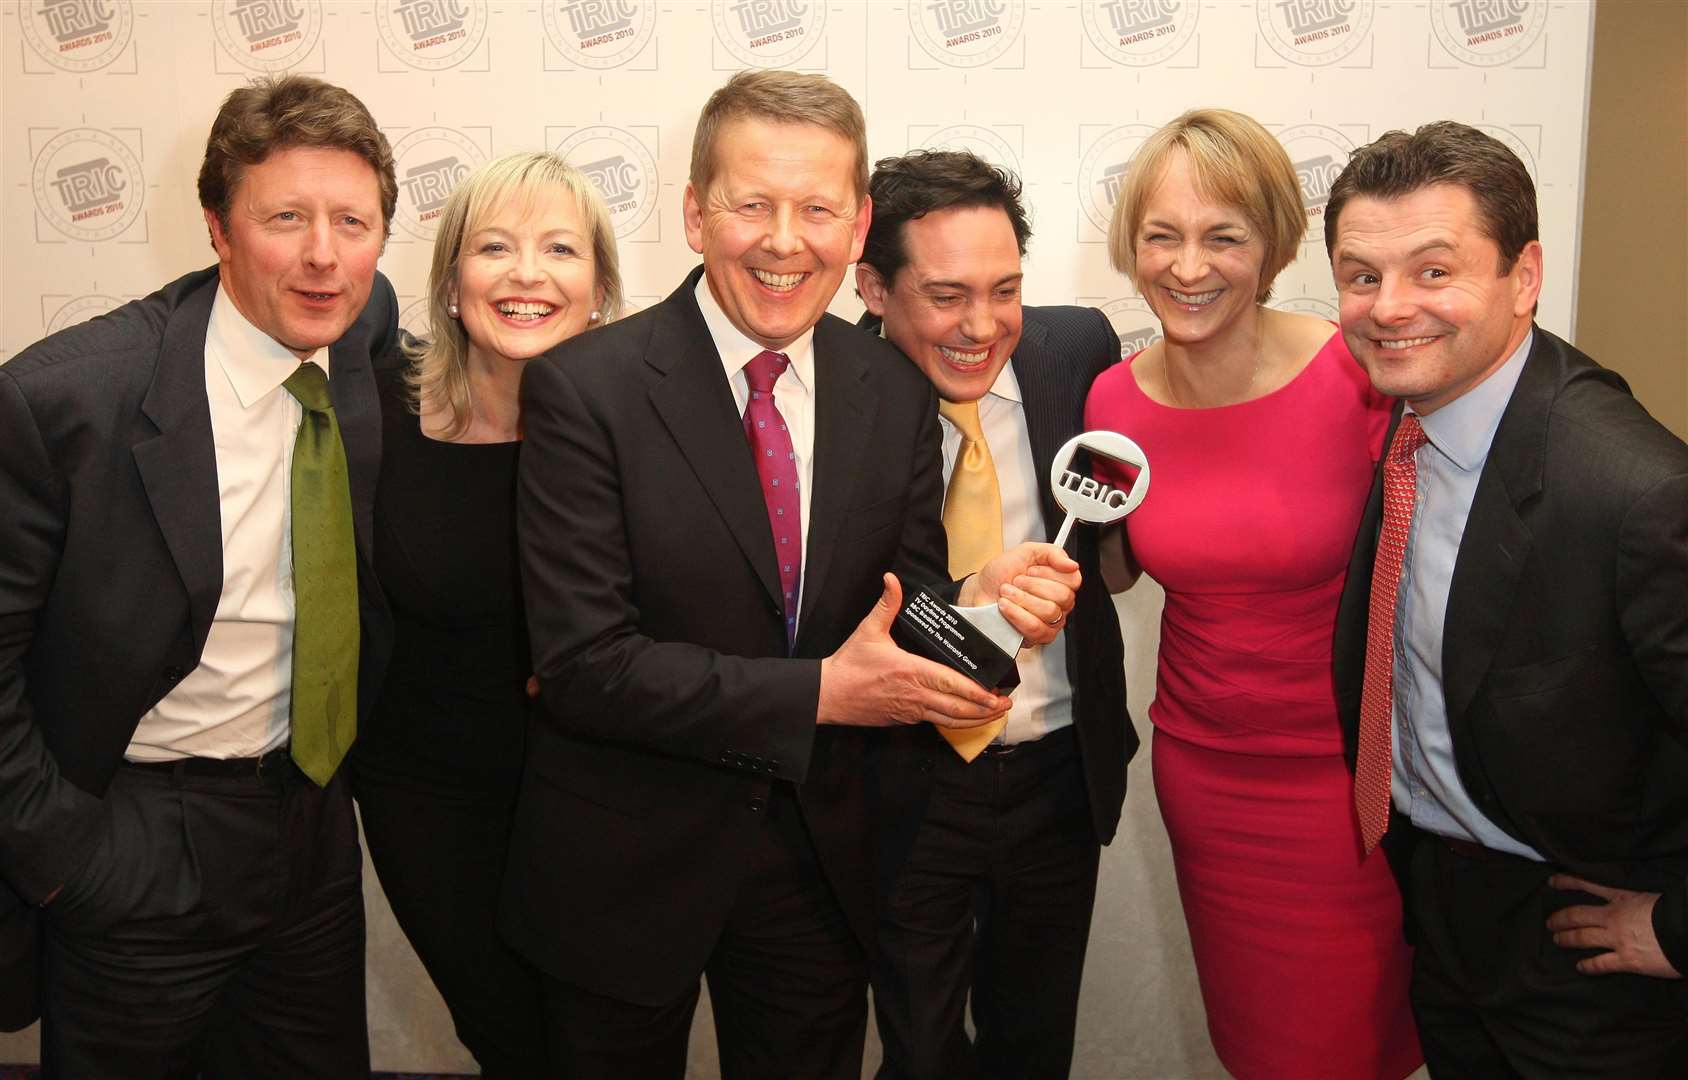 Charlie Stayt, Carol Kirkwood, Bill Turnbull, Simon Jack, Louise Minchin and Chris Hollins at the TRIC Annual Awards in 2010 (Dominic Lipinski/PA)